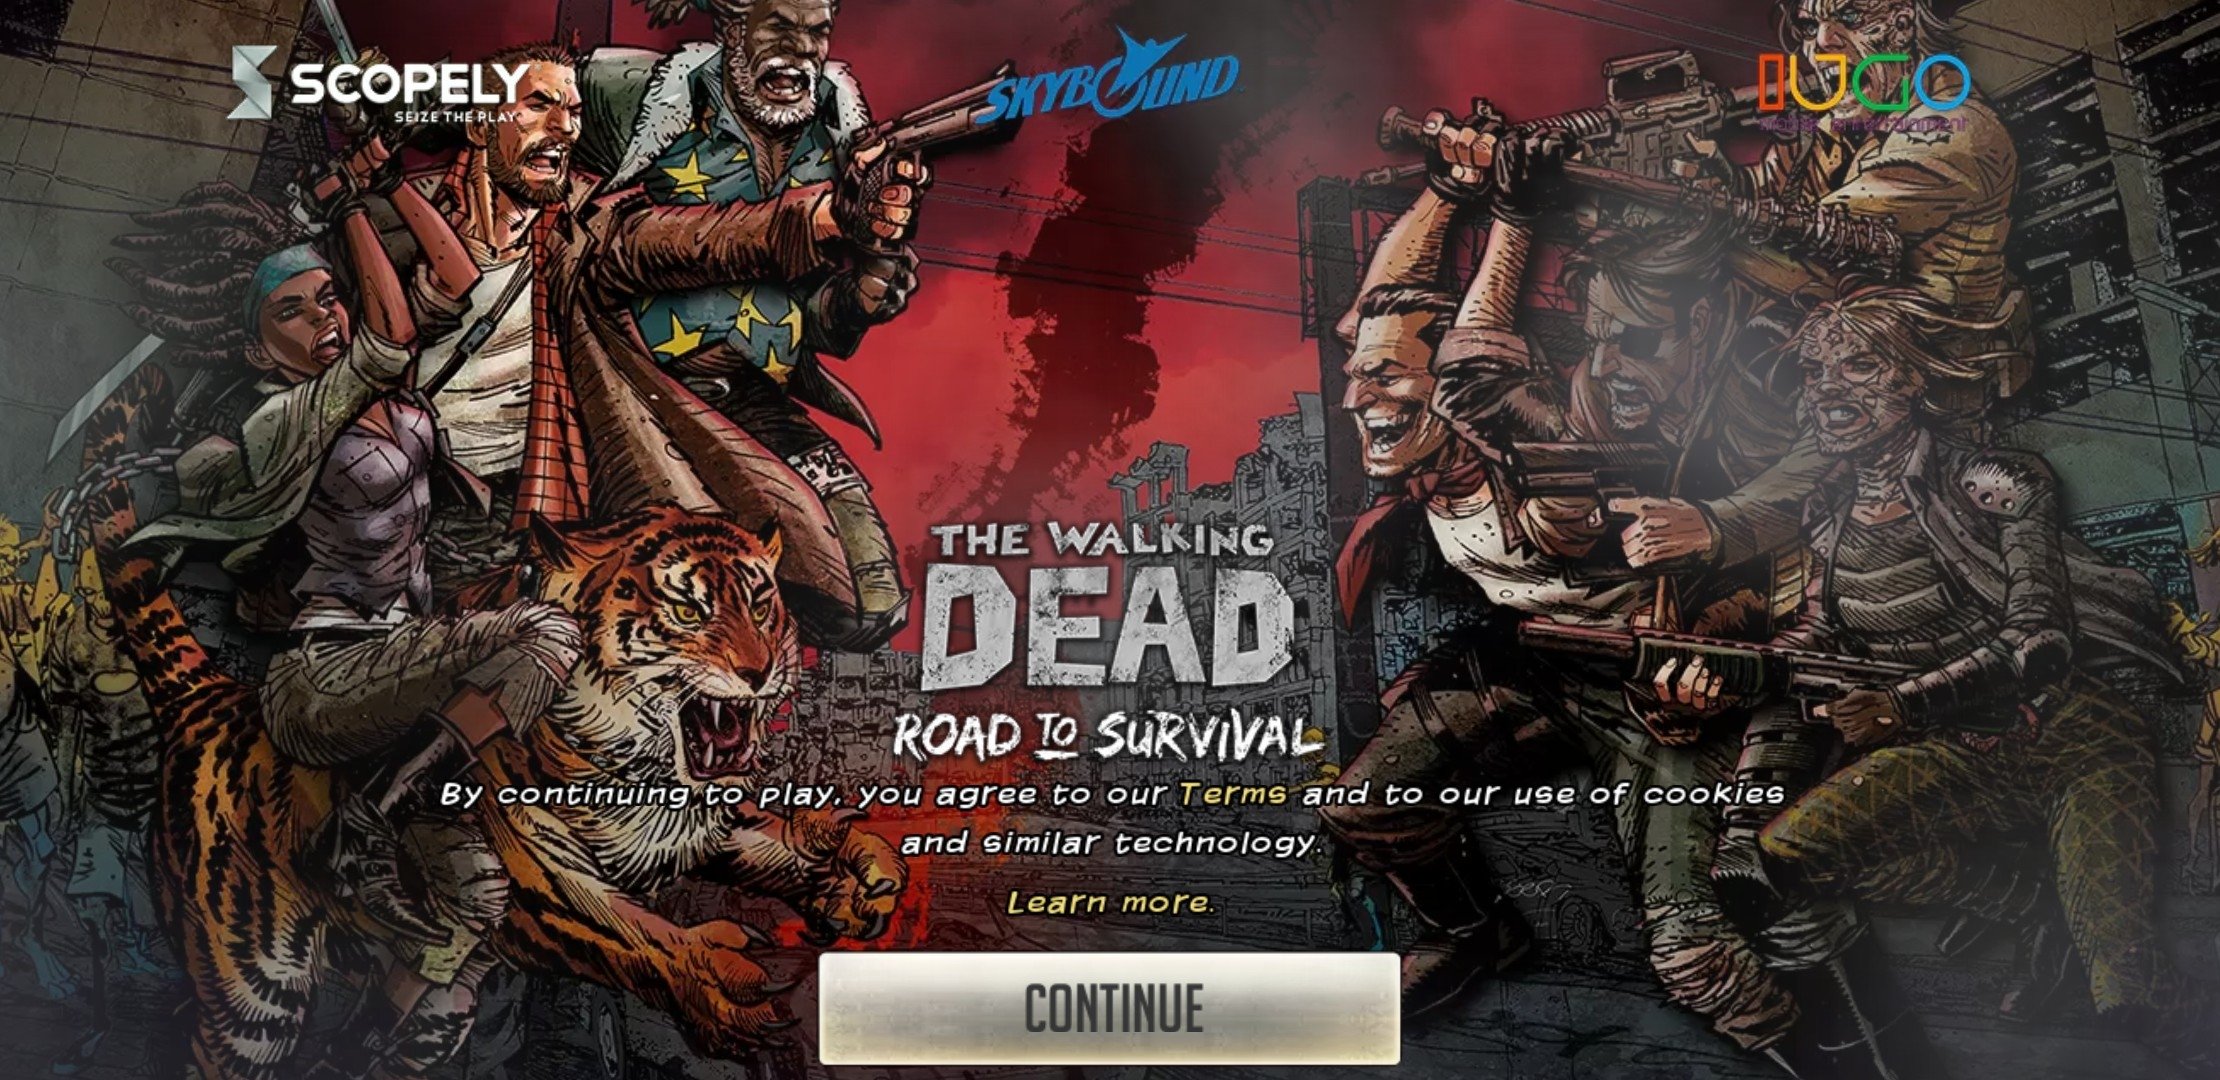 the walking dead road to survival com download free